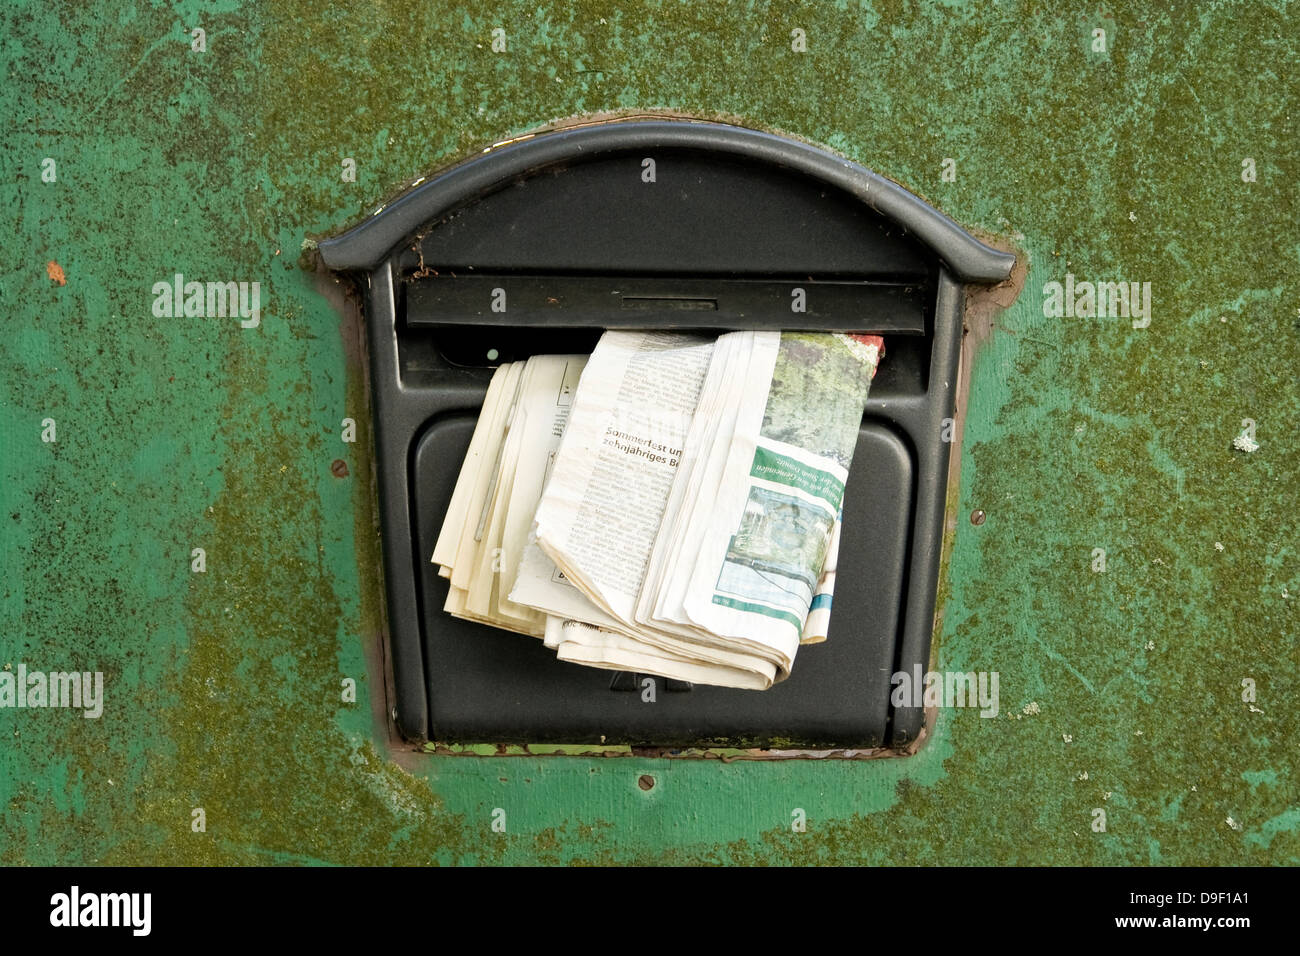 Mailbox with an older newspaper Character box with in earlier newspaper Stock Photo